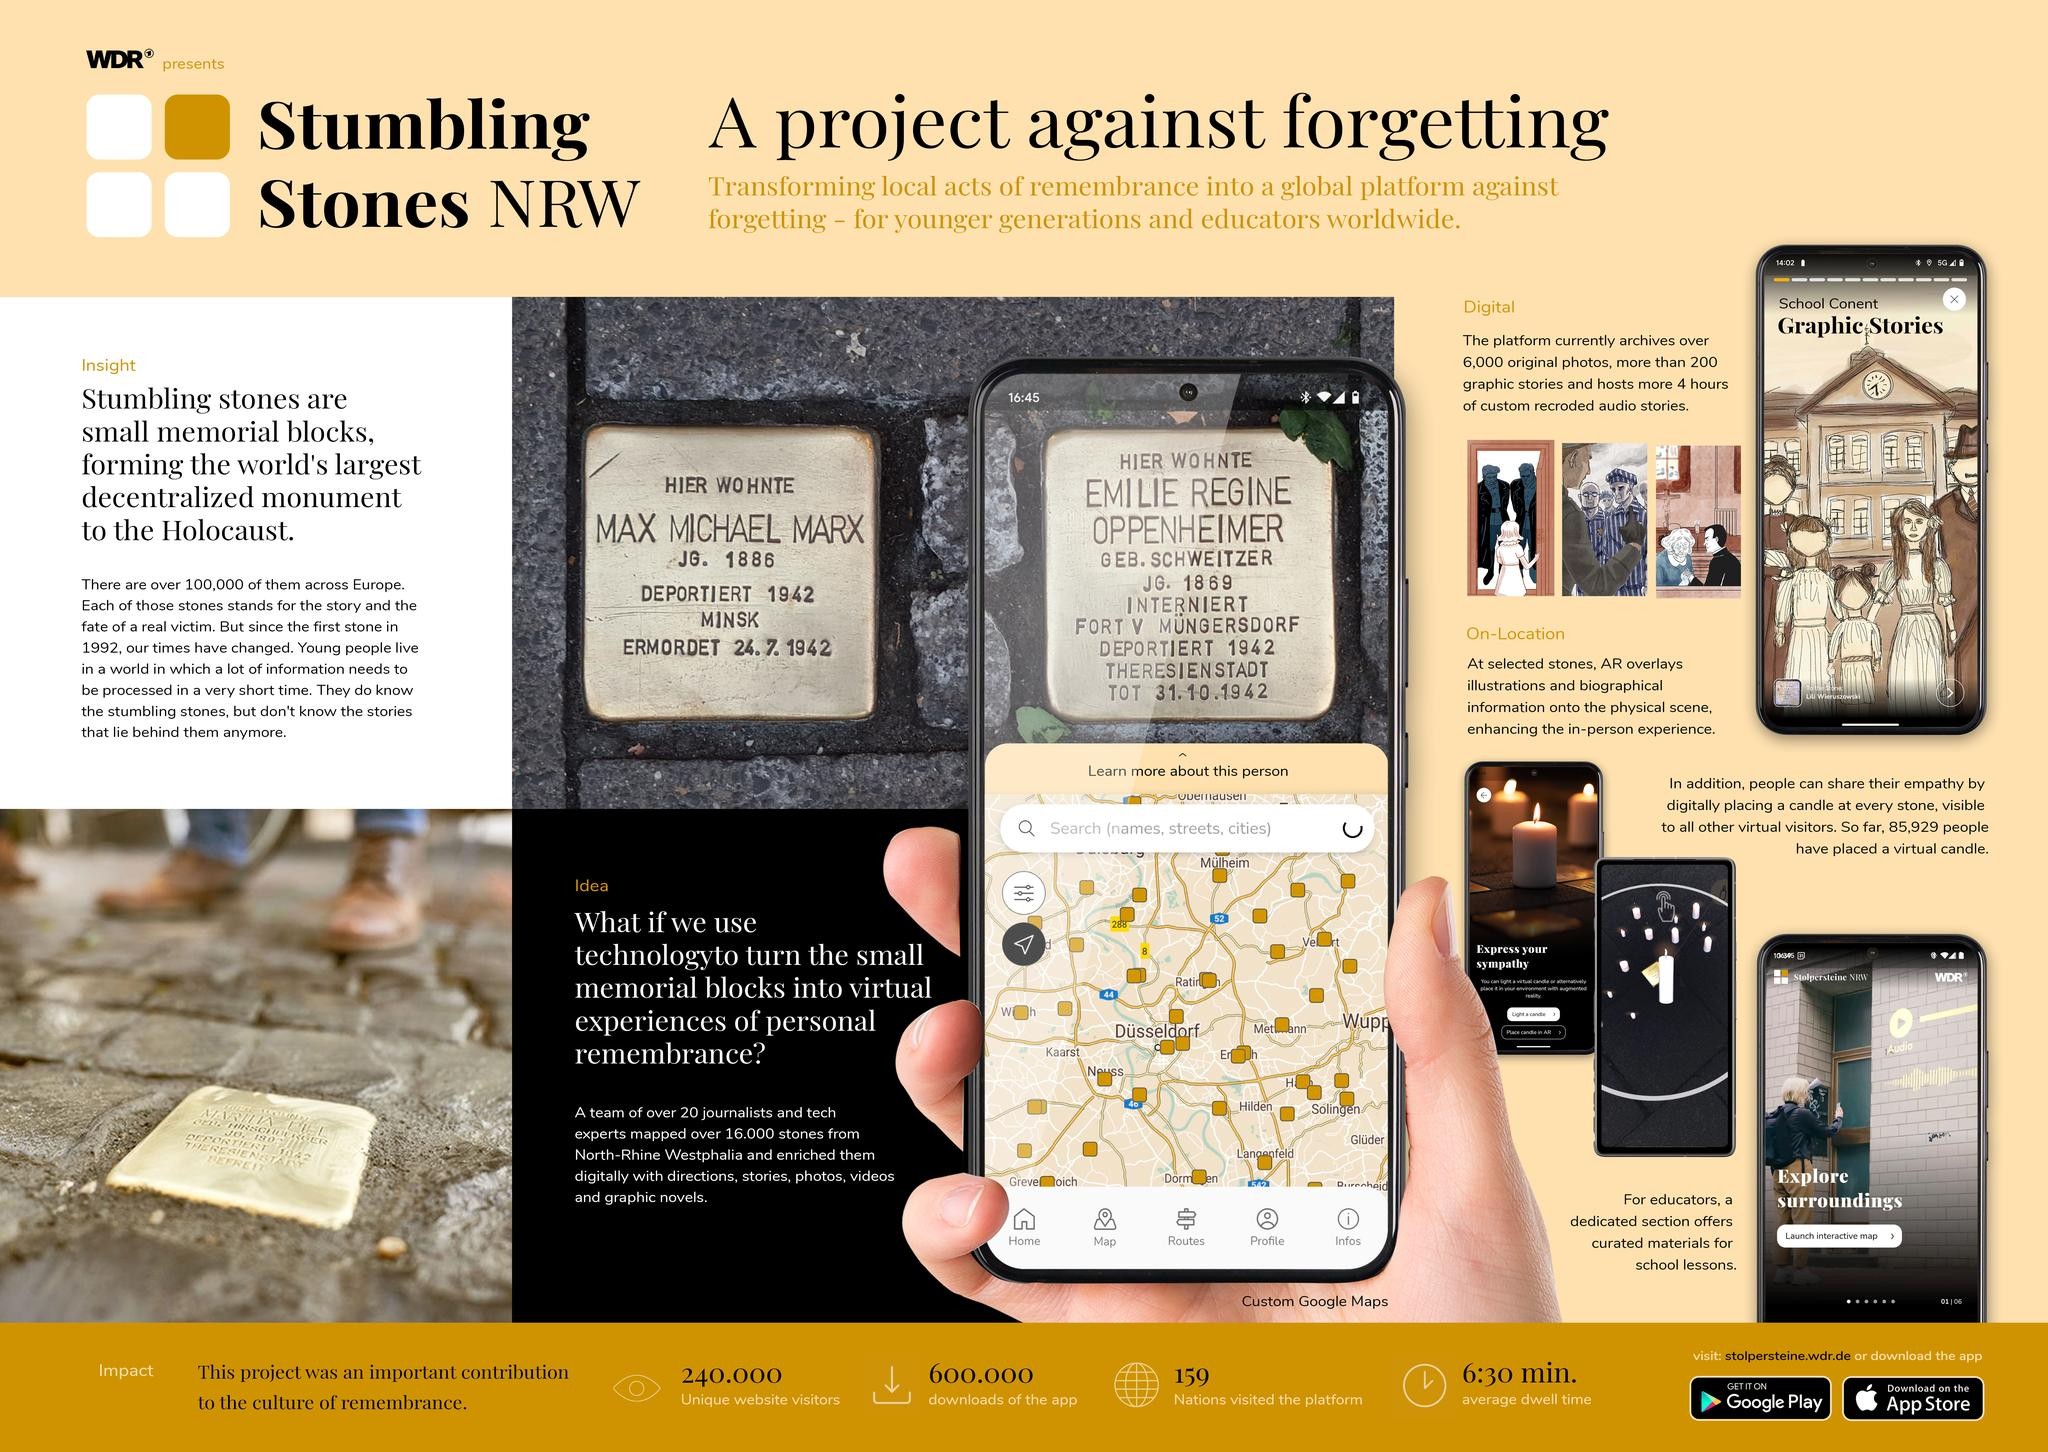 STUMBLING STONES NRW - A PROJECT AGAINST FORGETTING